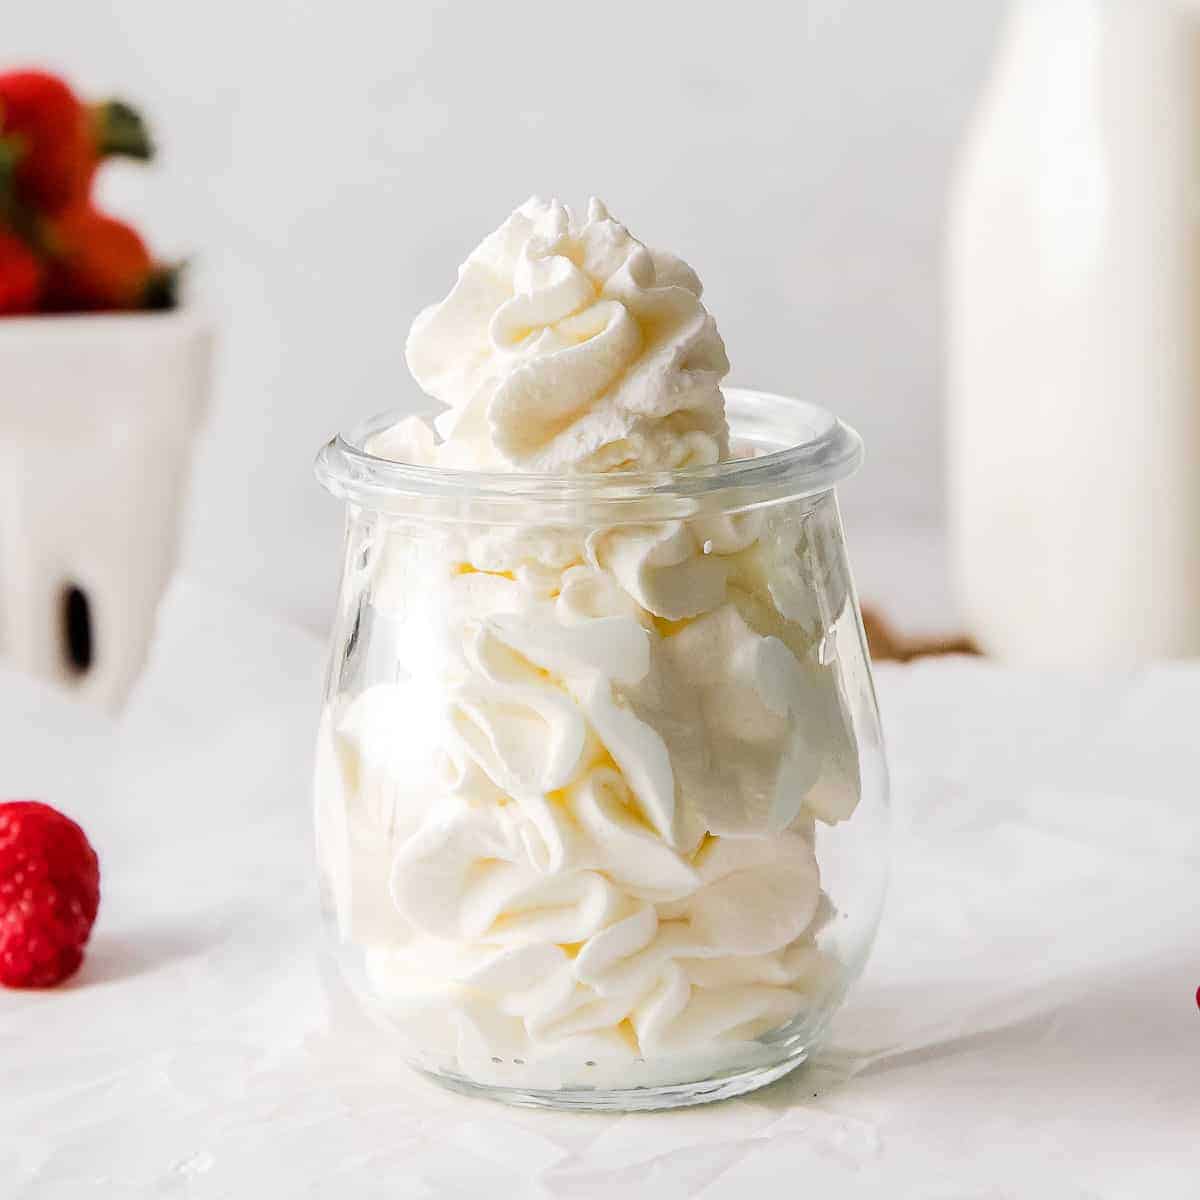 https://fitfoodiefinds.com/wp-content/uploads/2021/10/Homemade-Whipped-Cream-12-1.jpg